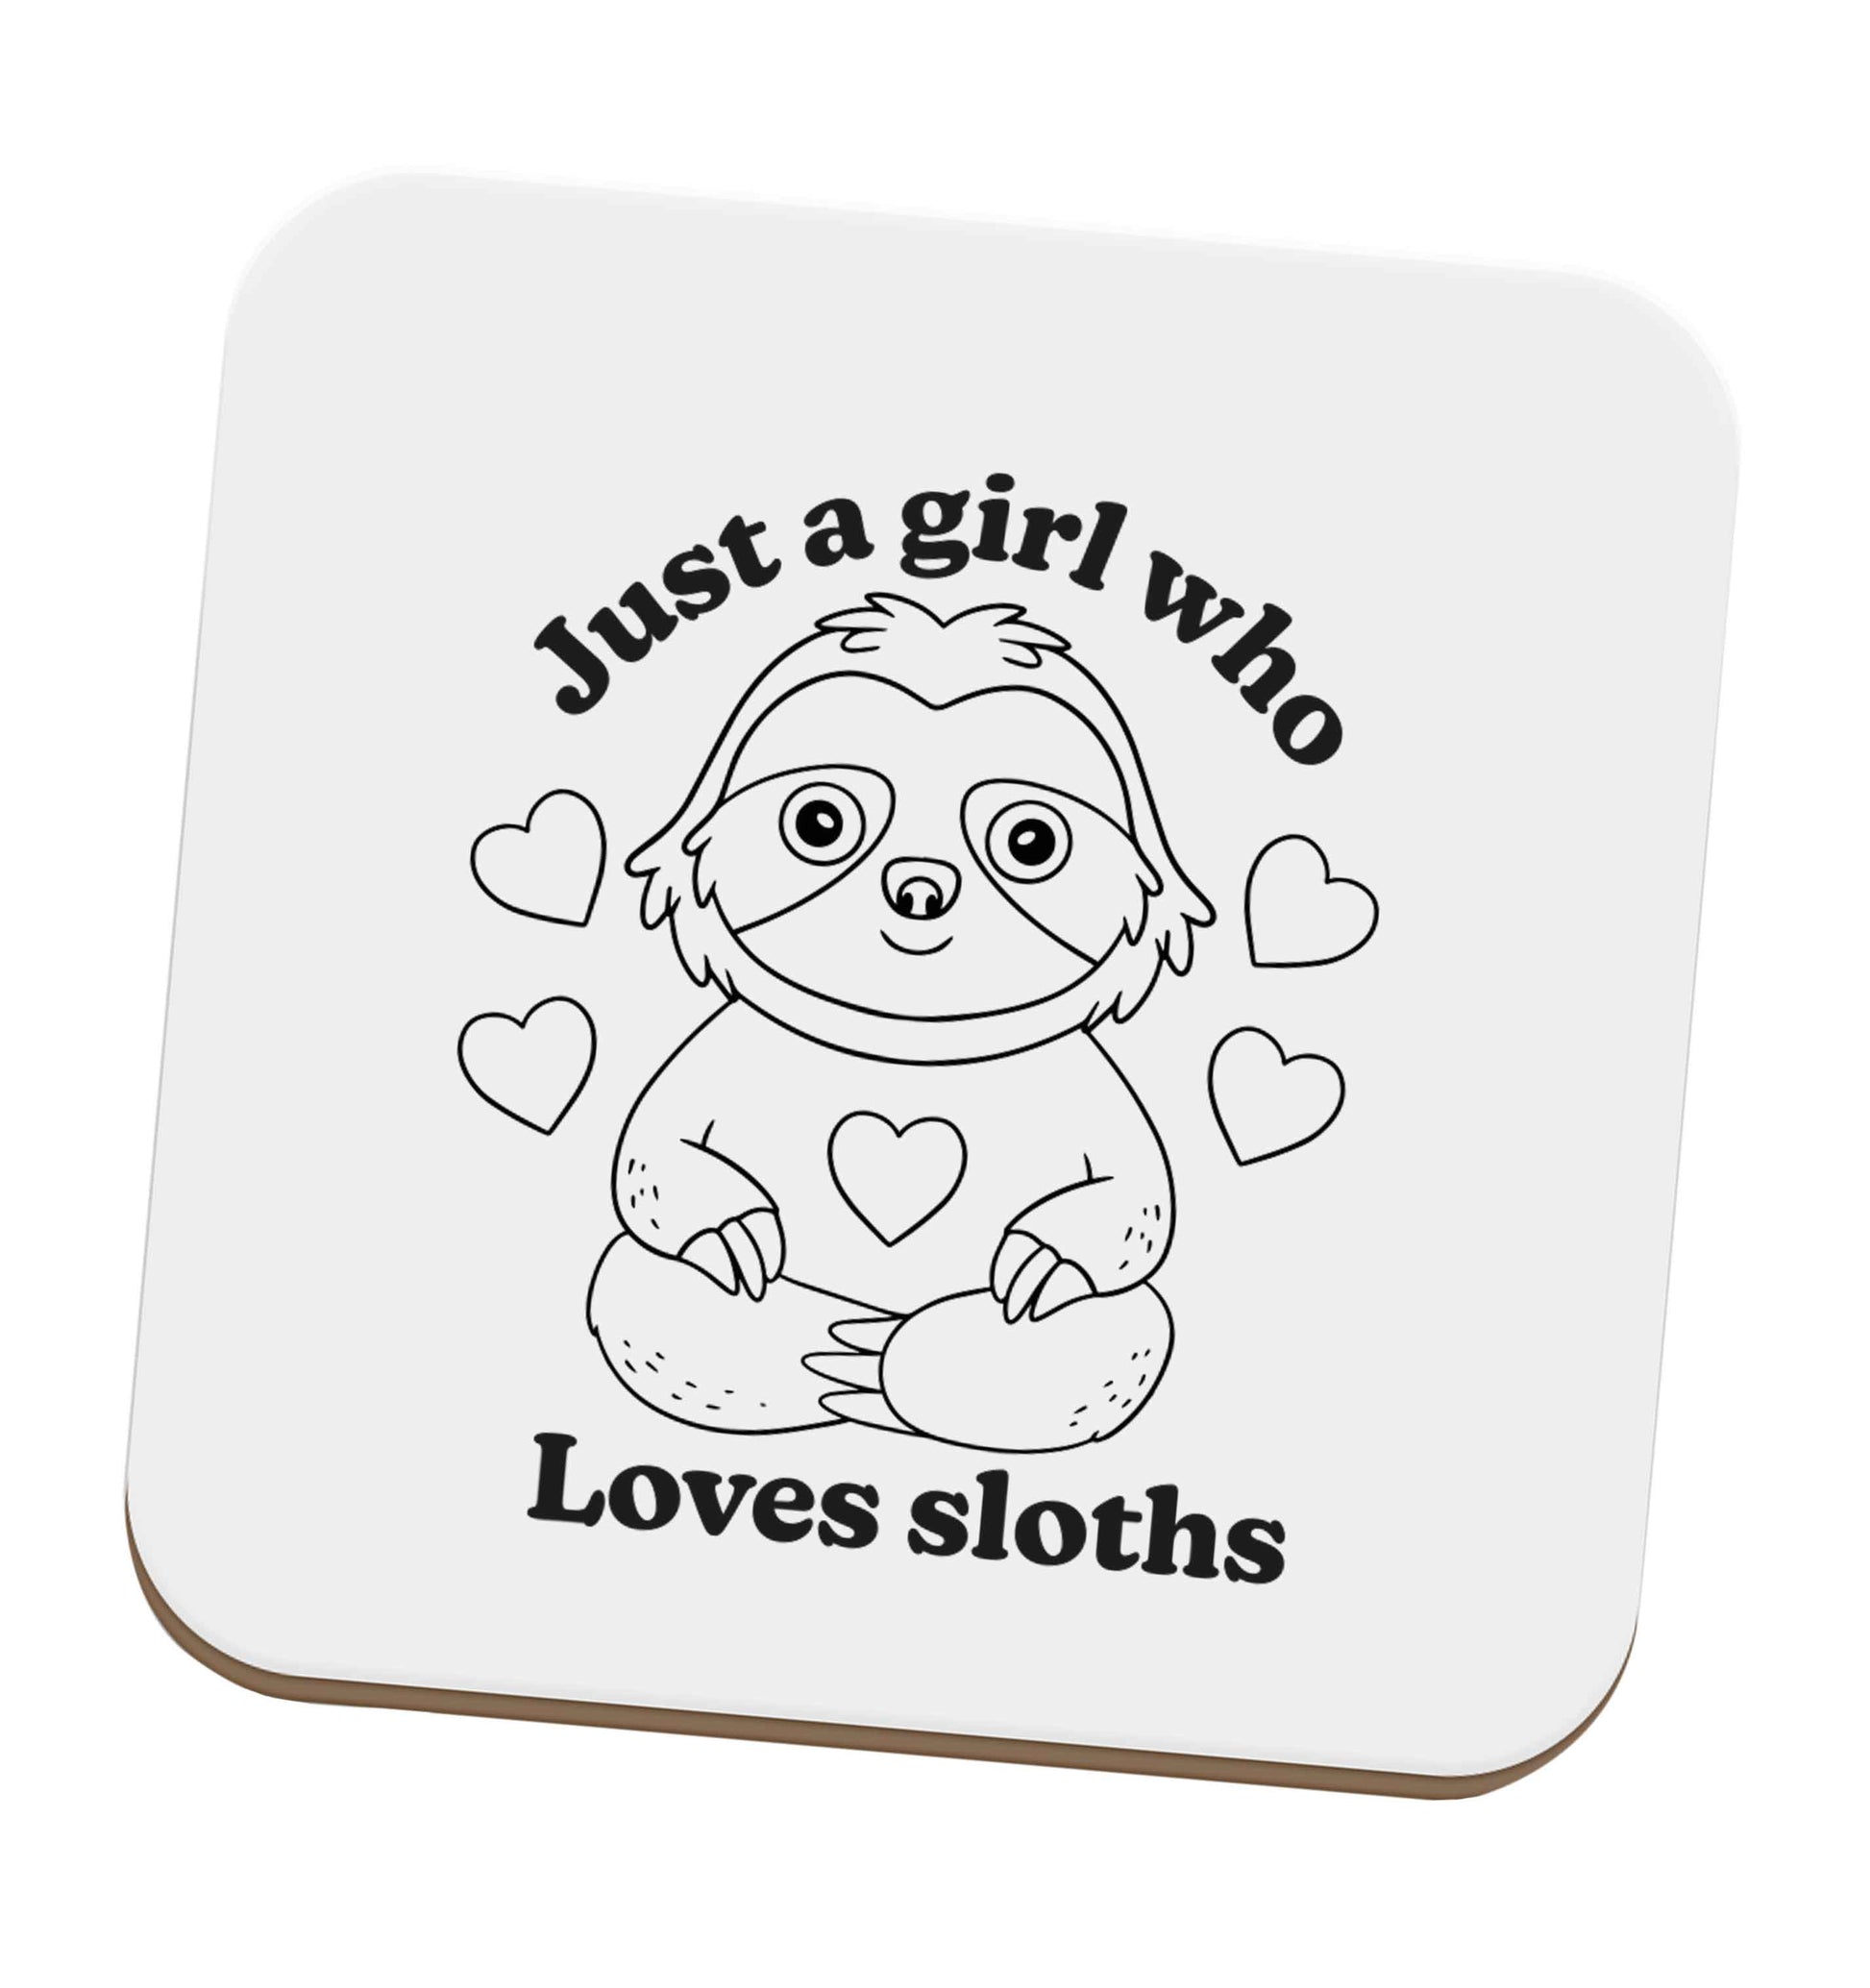 Just a girl who loves sloths set of four coasters